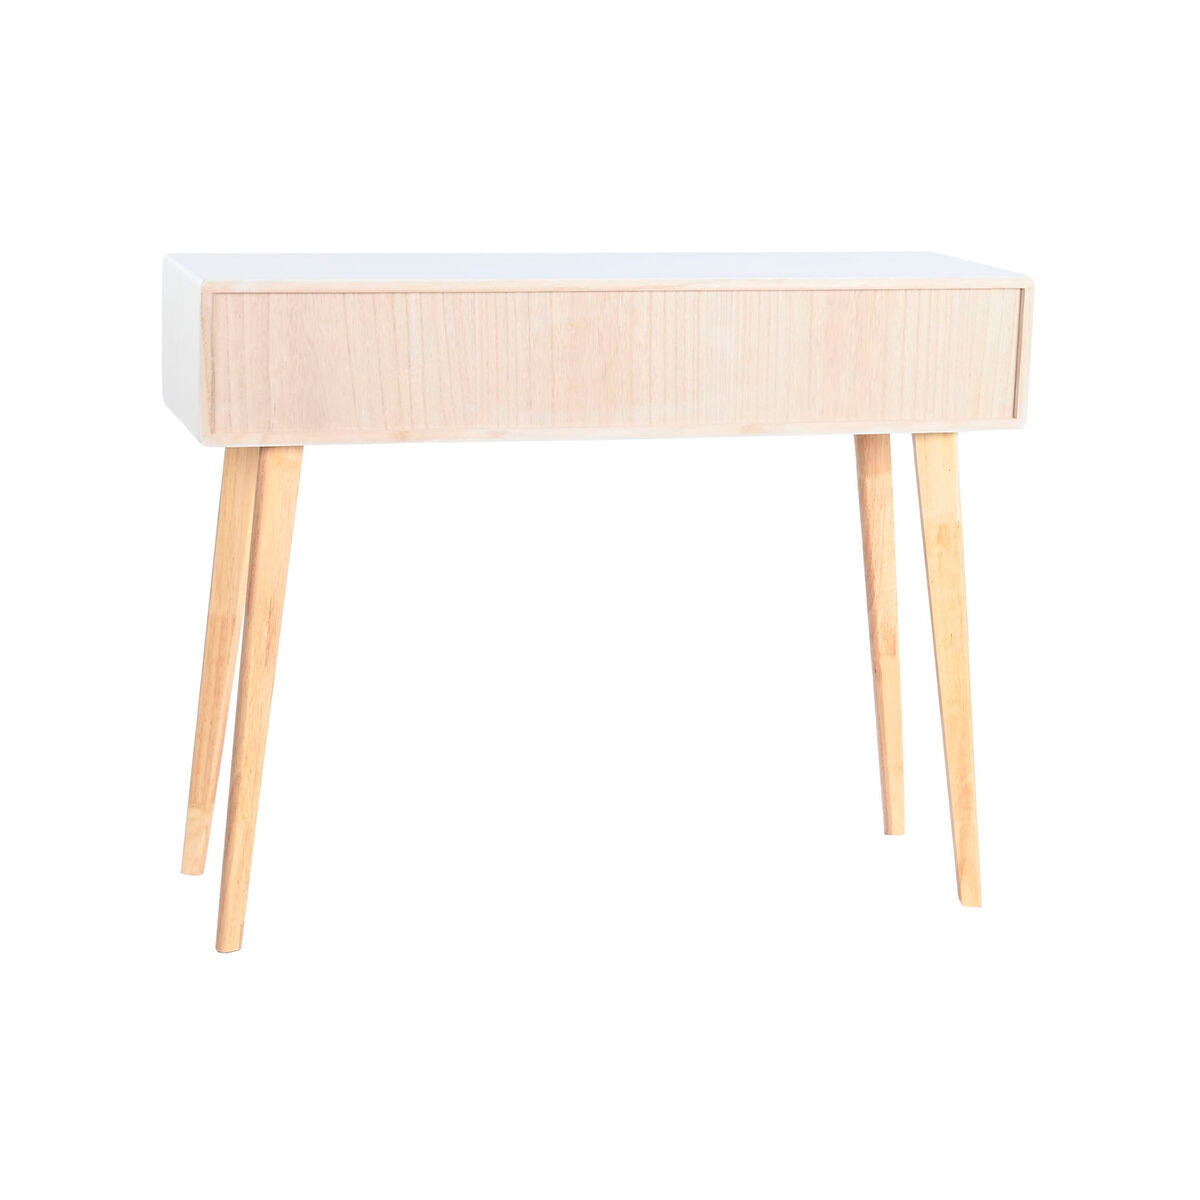 Console DKD Home Decor White Paolownia wood 100 x 30 x 78 cm